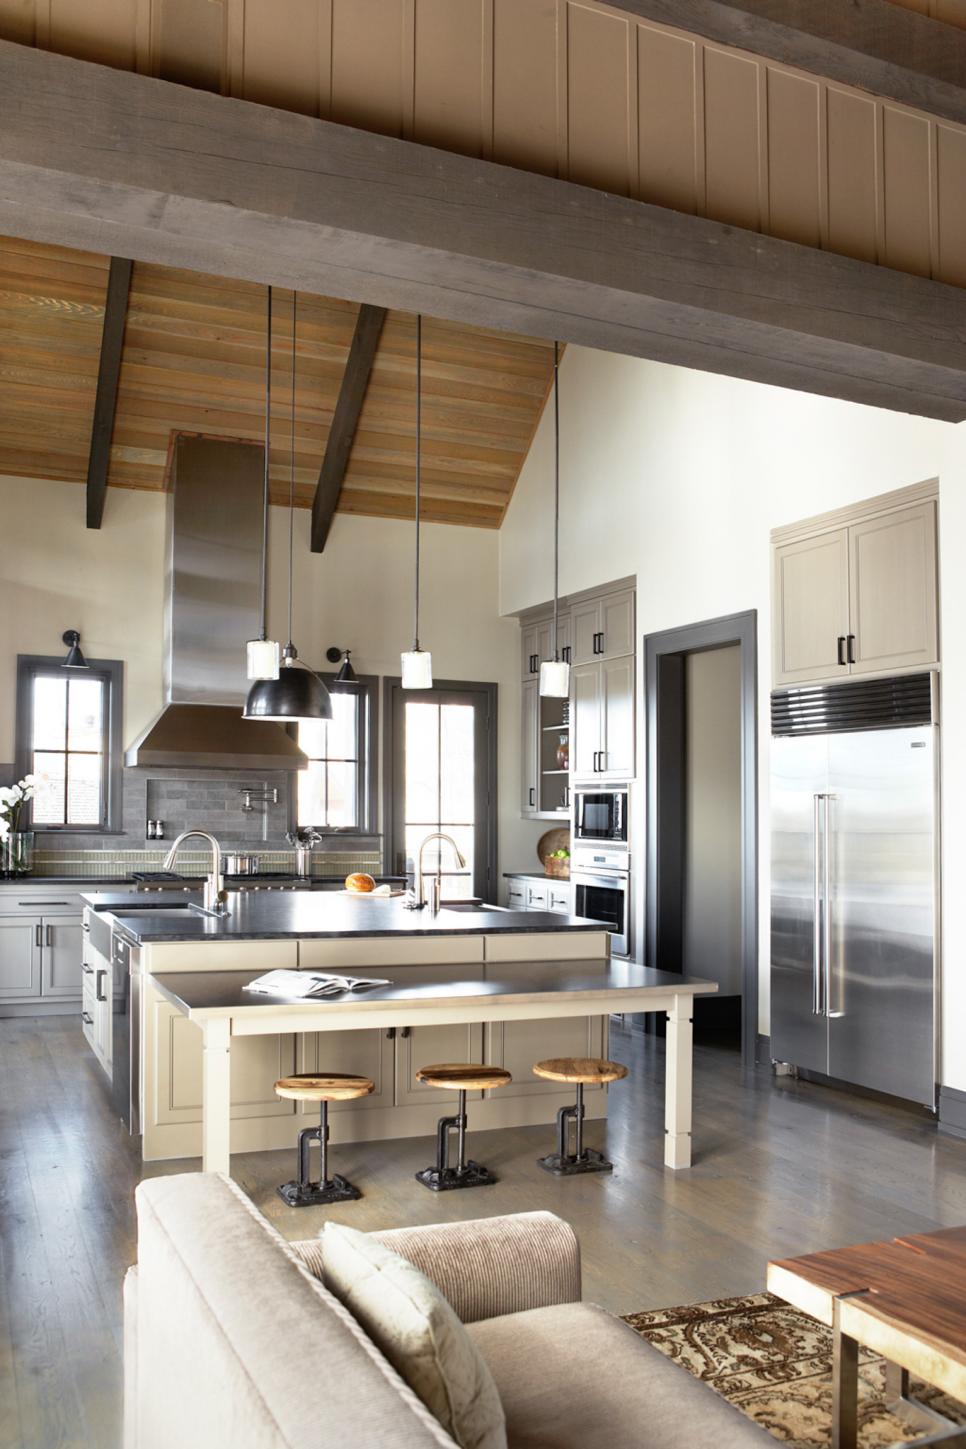 Industrial Kitchen With Exposed Beams and Island